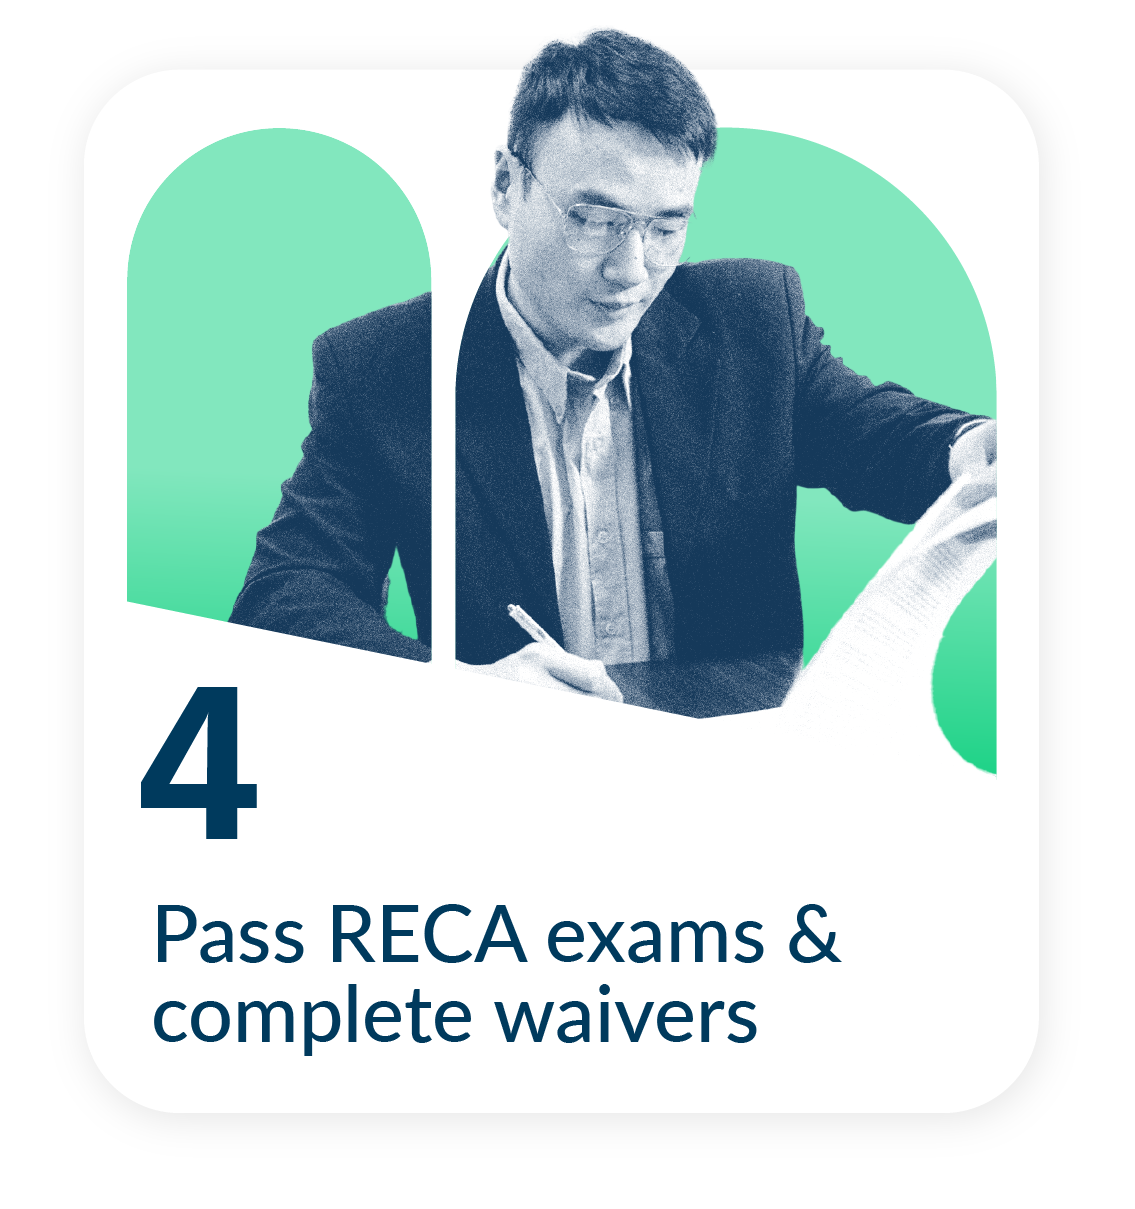 pass reca exams and complete waivers